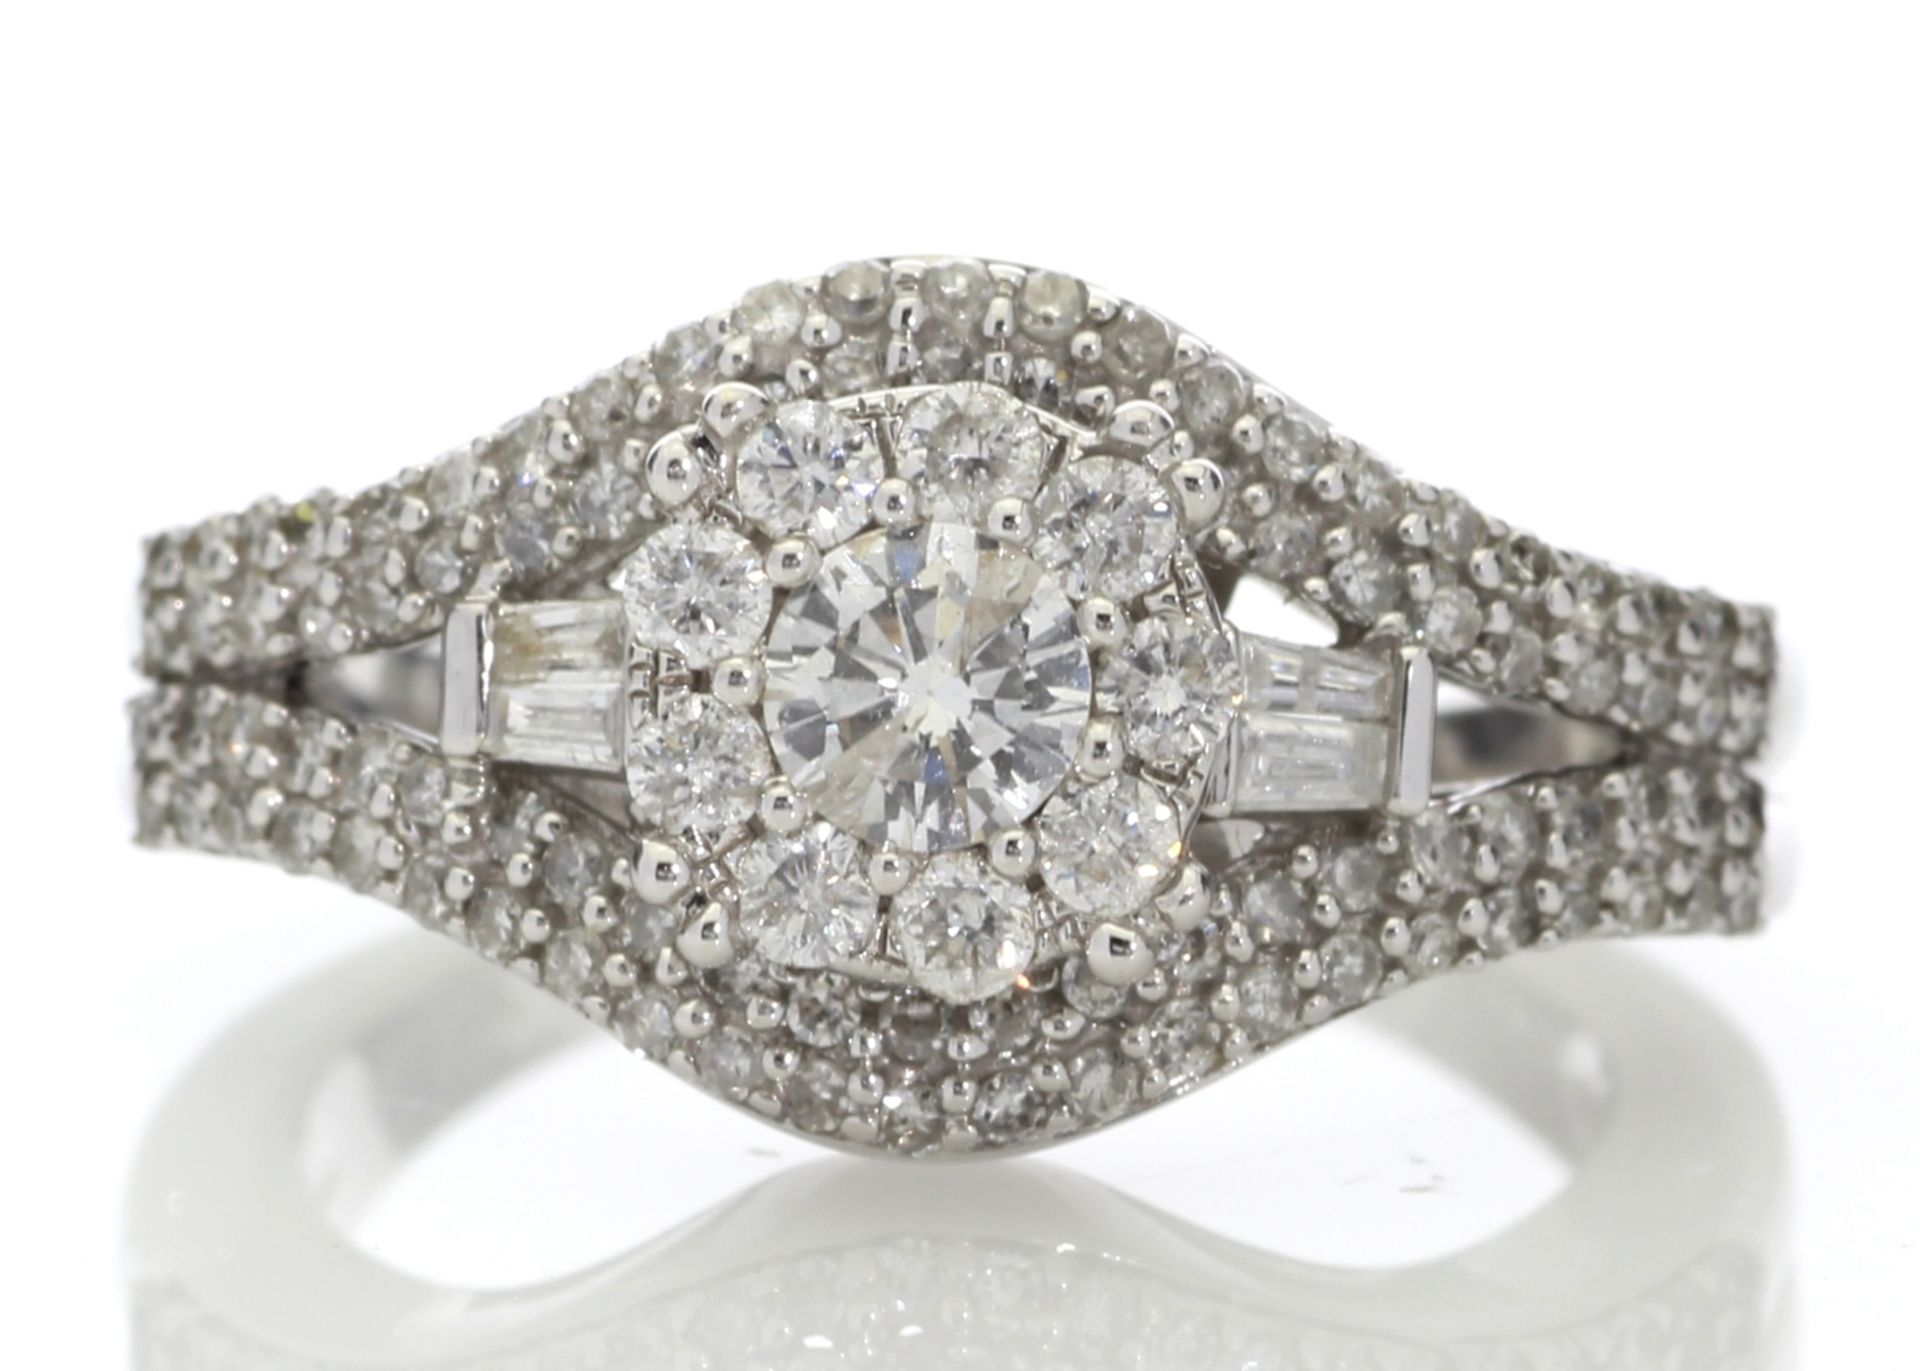 9ct White Gold Round Cluster Claw Set Diamond Ring 1.00 Carats - Valued by AGI £4,180.00 - This